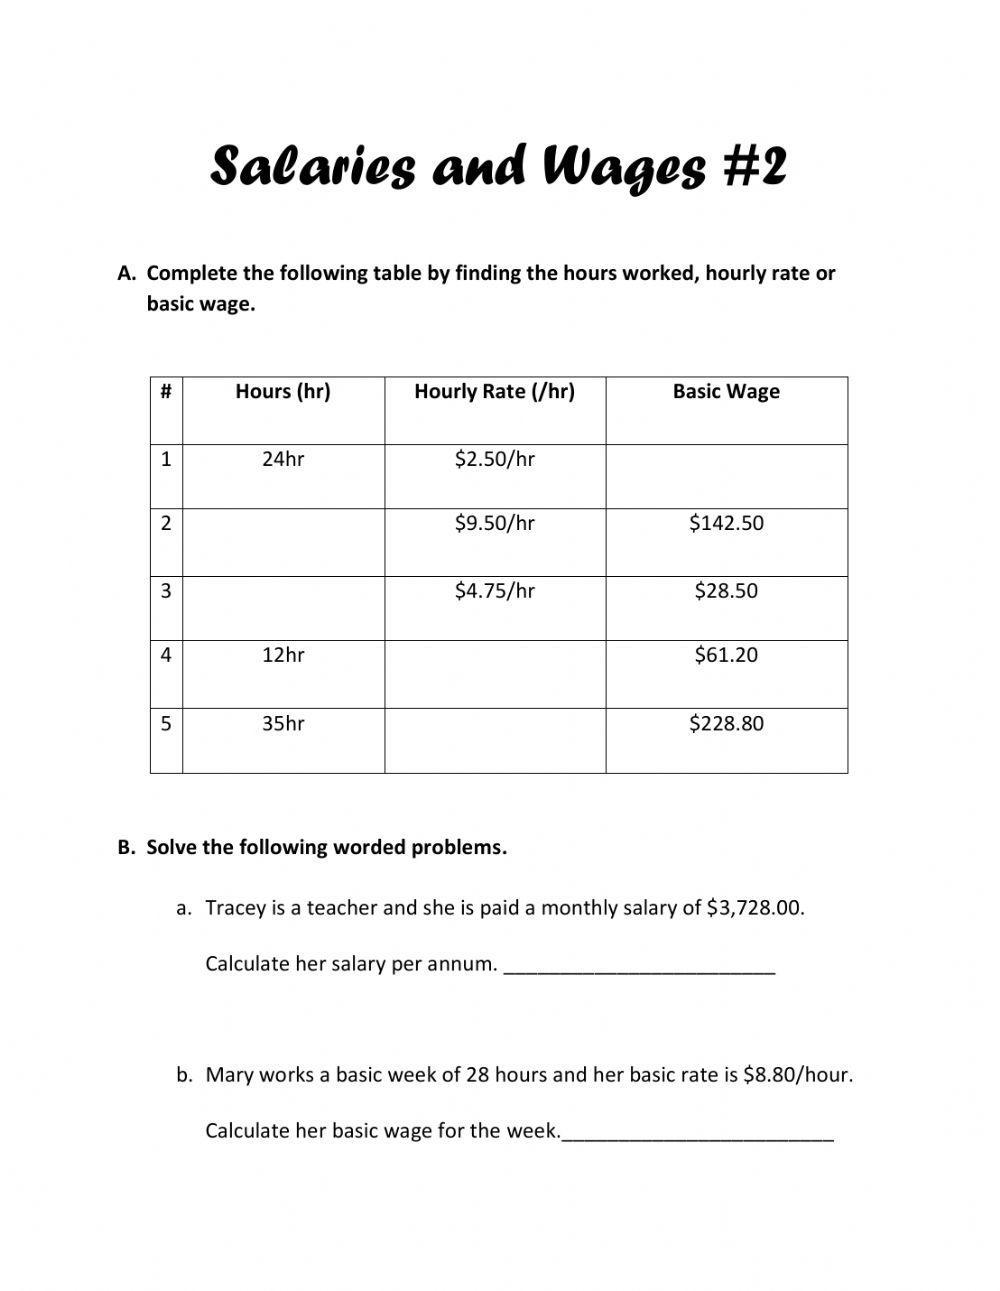 Wages and Salaries